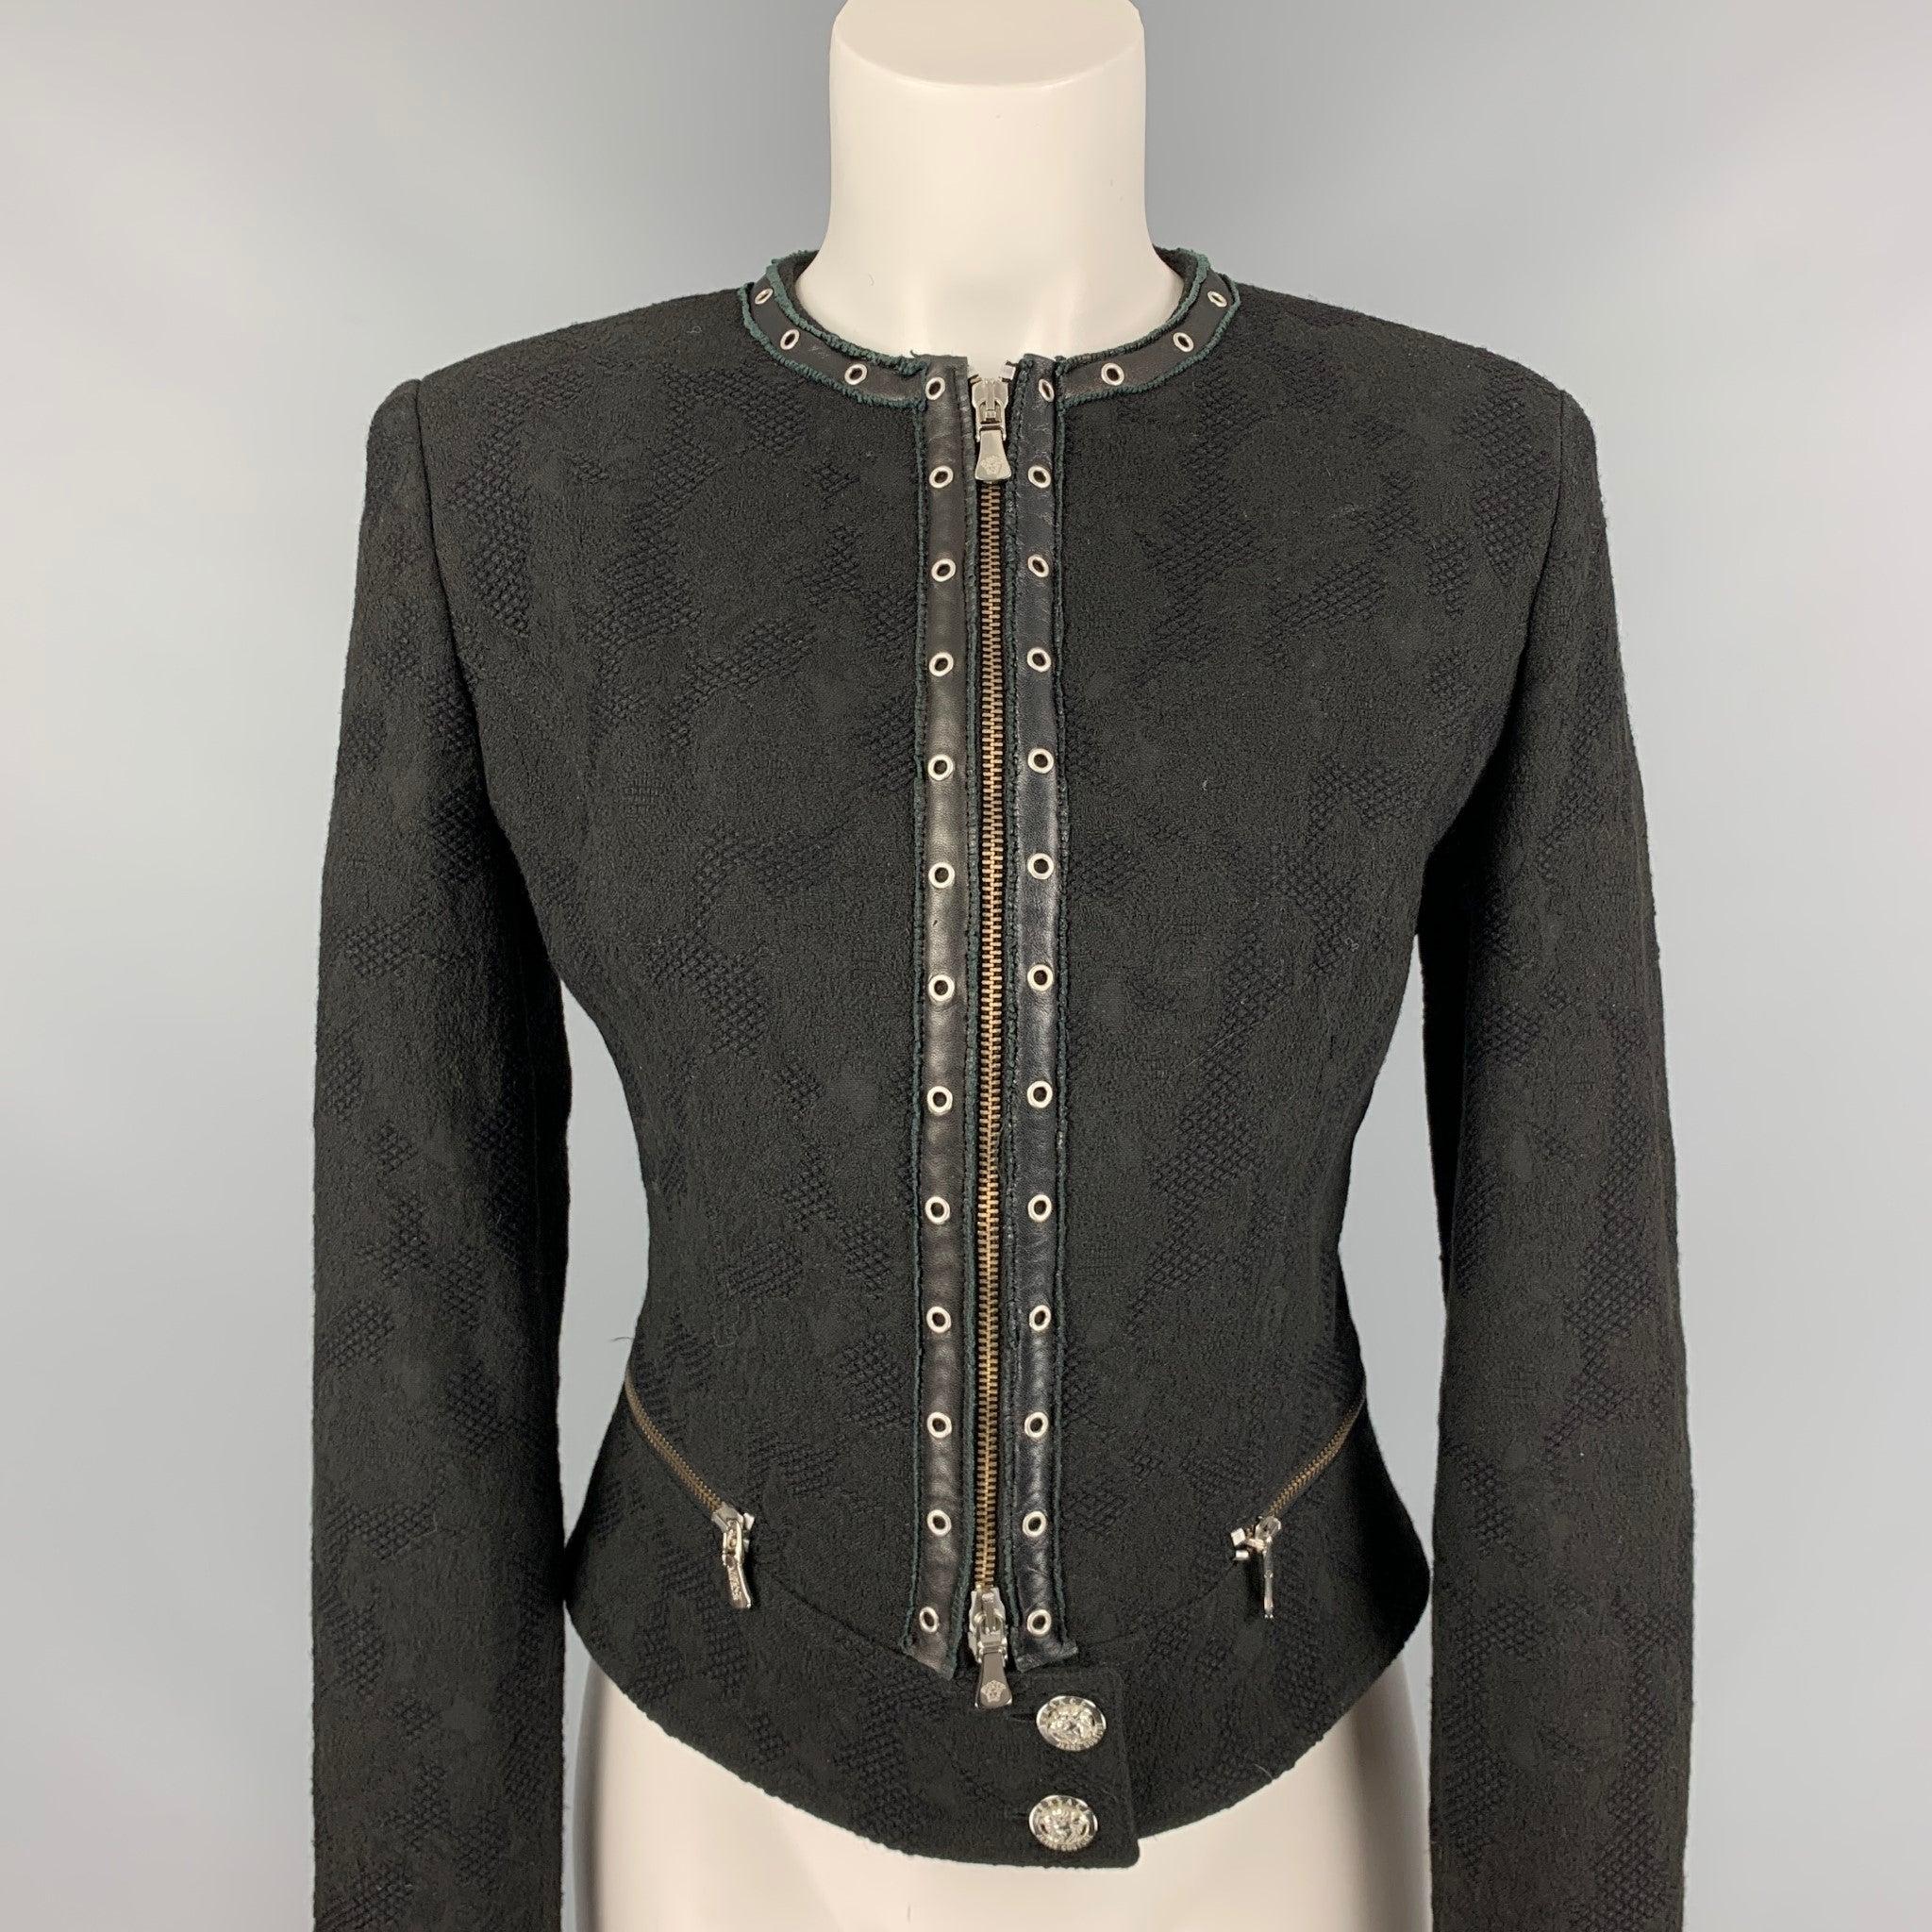 VERSACE JEANS COUTURE jacket comes in a black jacquard material featuring a grommet trim, silver tone hardware, logo buttons, leather trim, collarless, and a zip up closure.
Very Good
Pre-Owned Condition. 

Marked:   M 

Measurements: 
 
Shoulder: